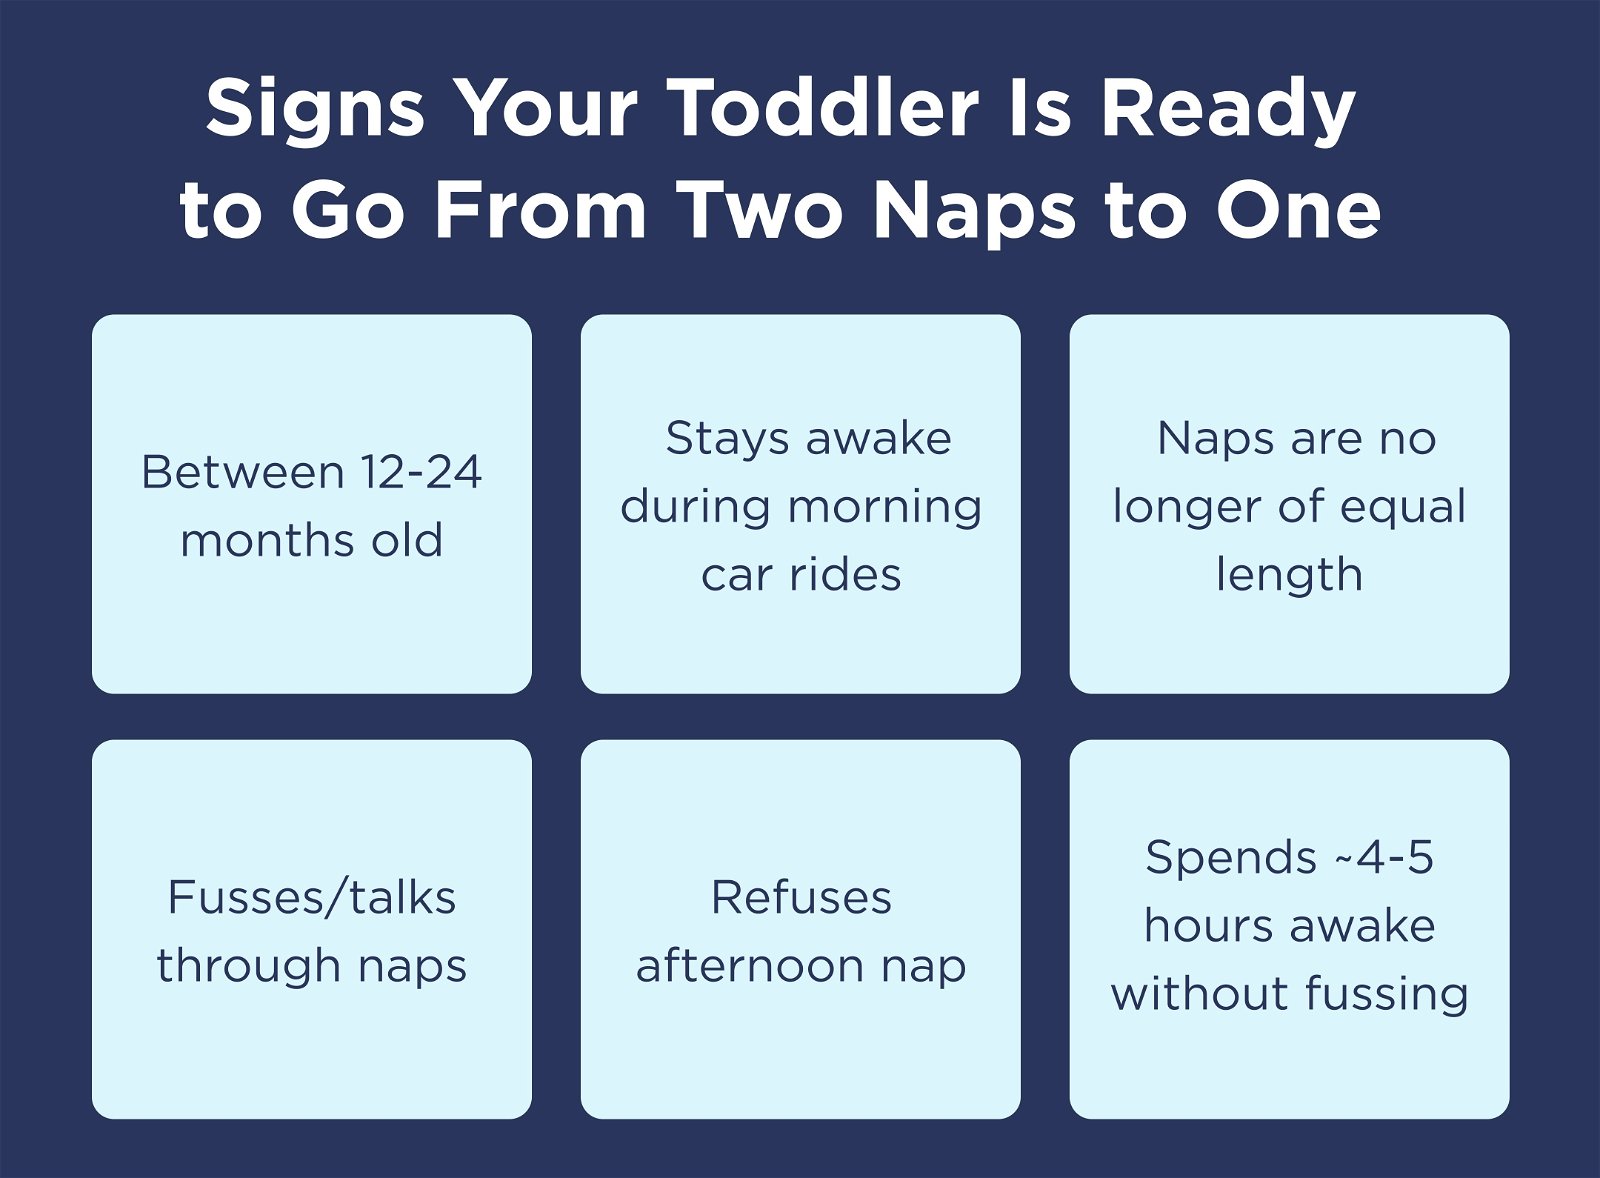 Signs Your Toddler Is Ready to Go From Two Naps to One. Between 12-24 months old. Stays awake during morning car rides. Naps are no longer of equal length. Fusses/talks through naps. Refuses afternoon nap. Spends ~4-5 hours awake without fussing